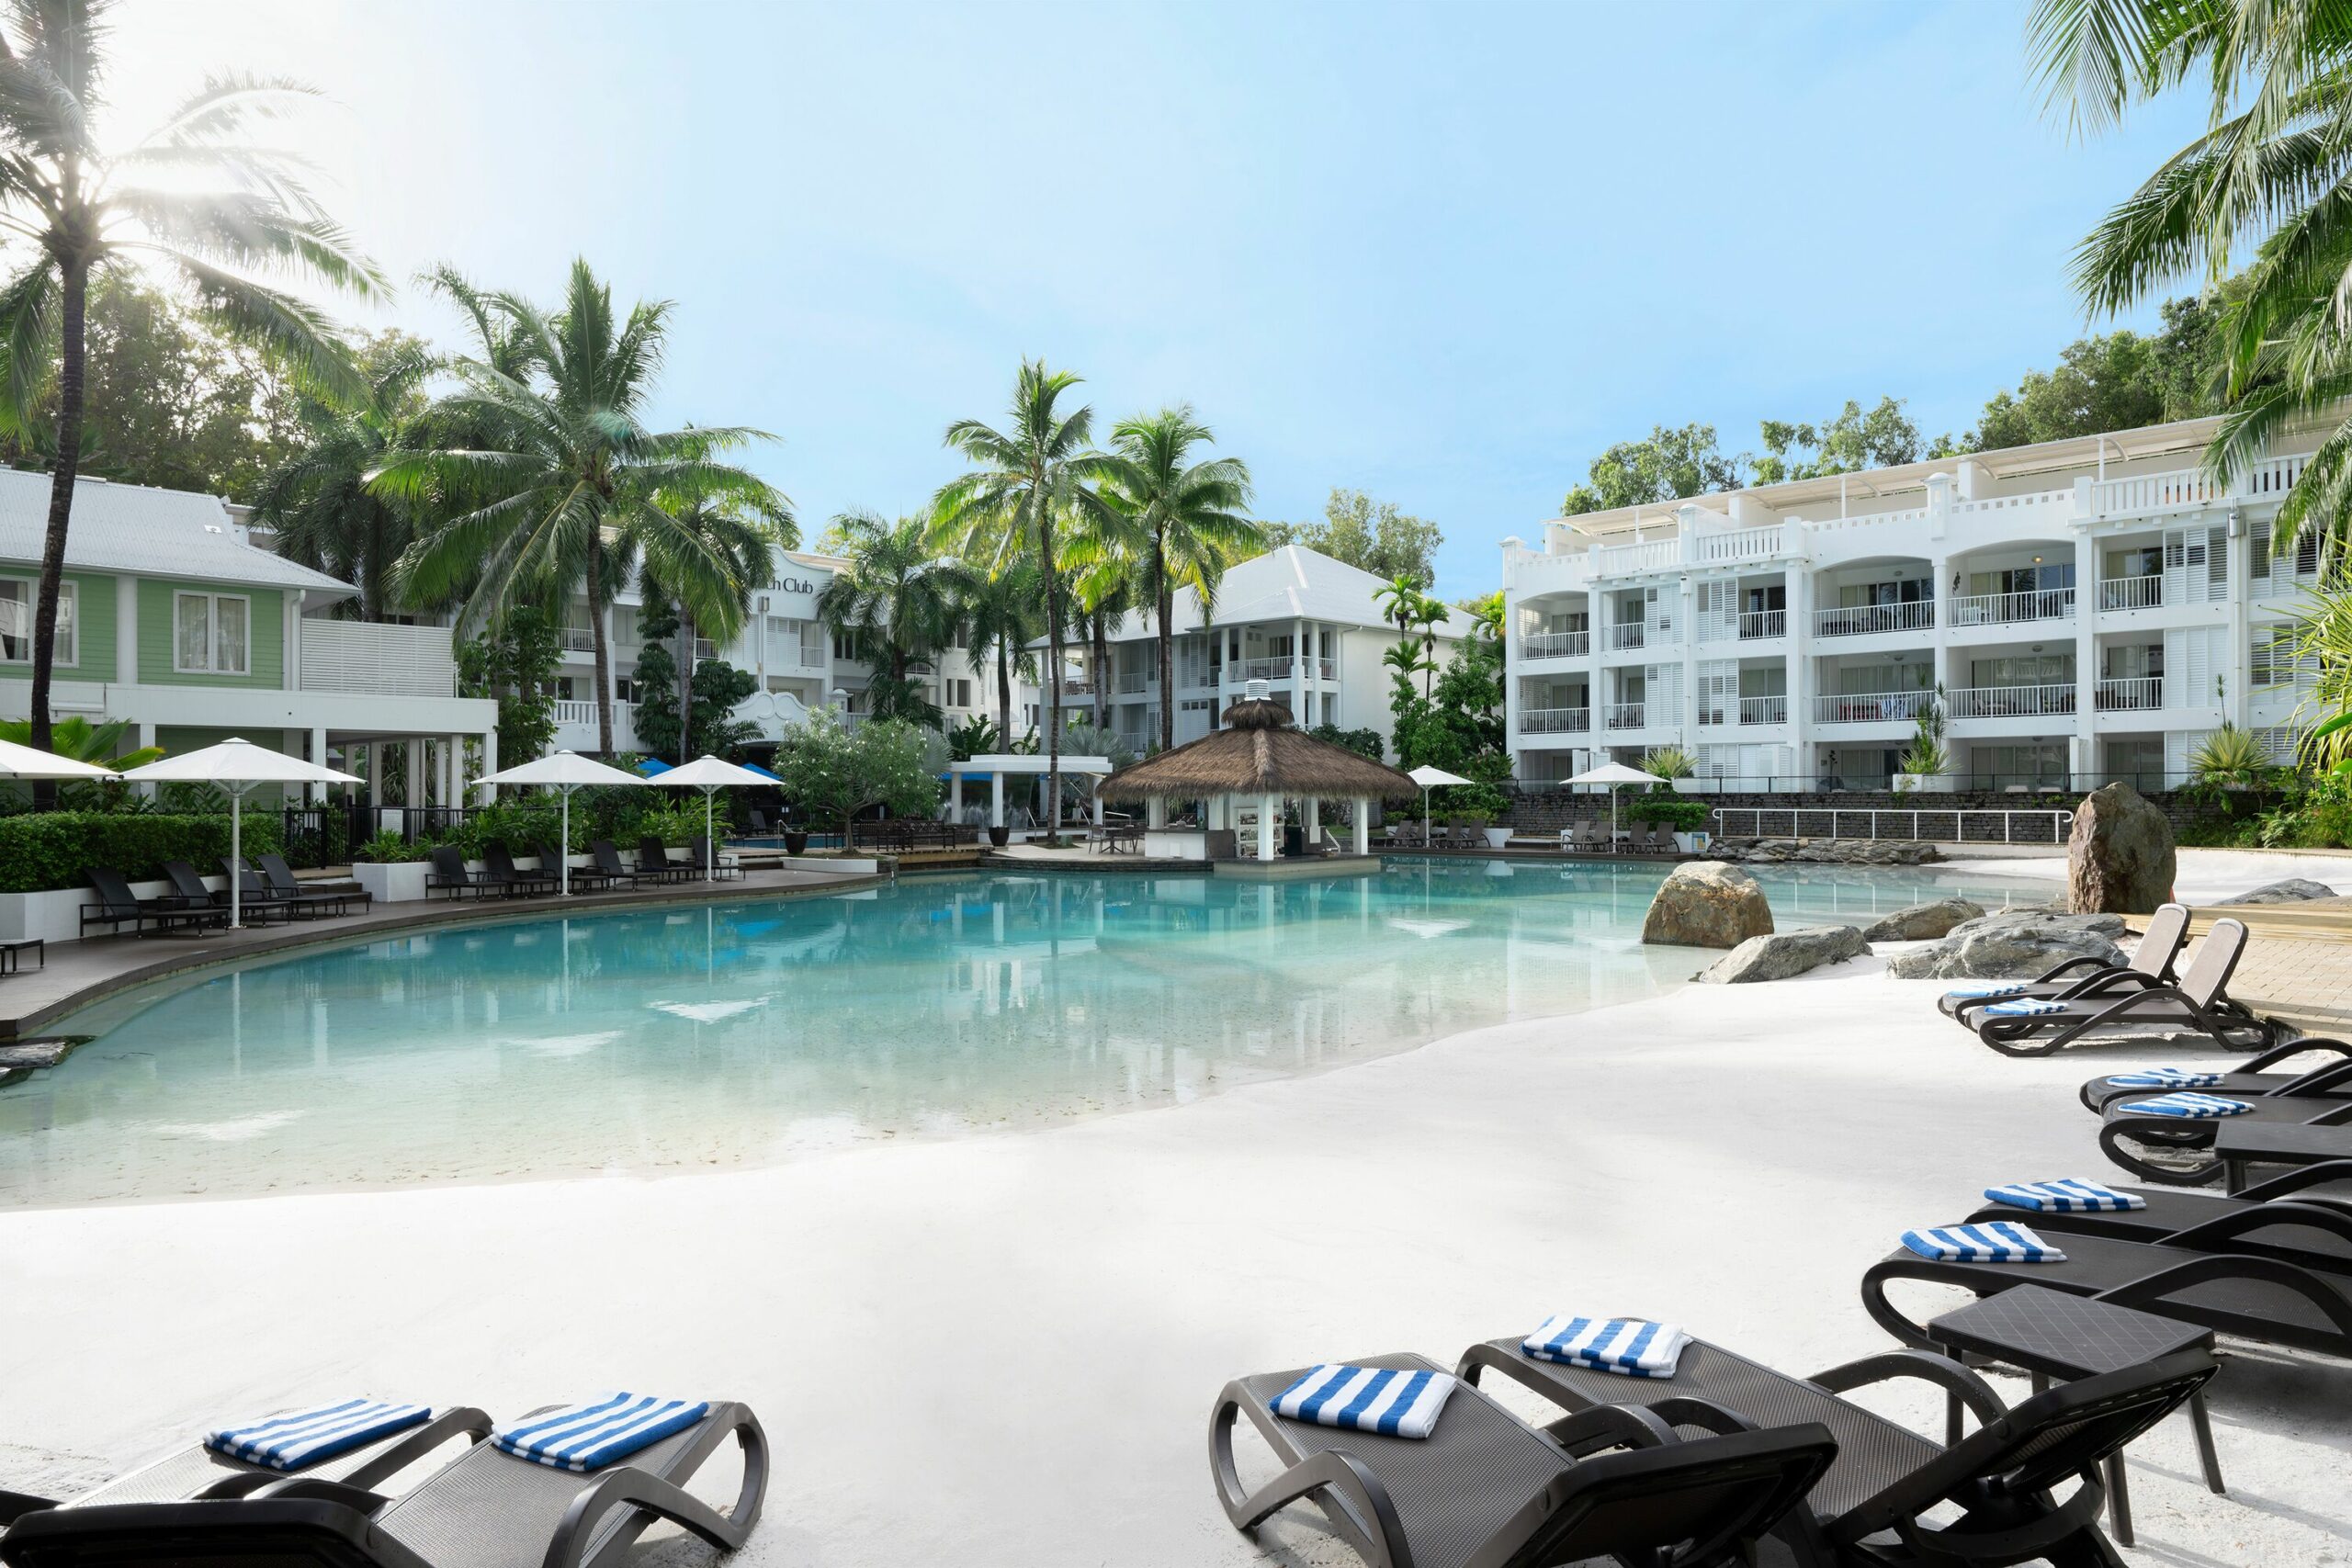 Peppers Beach Club and Spa – Palm Cove